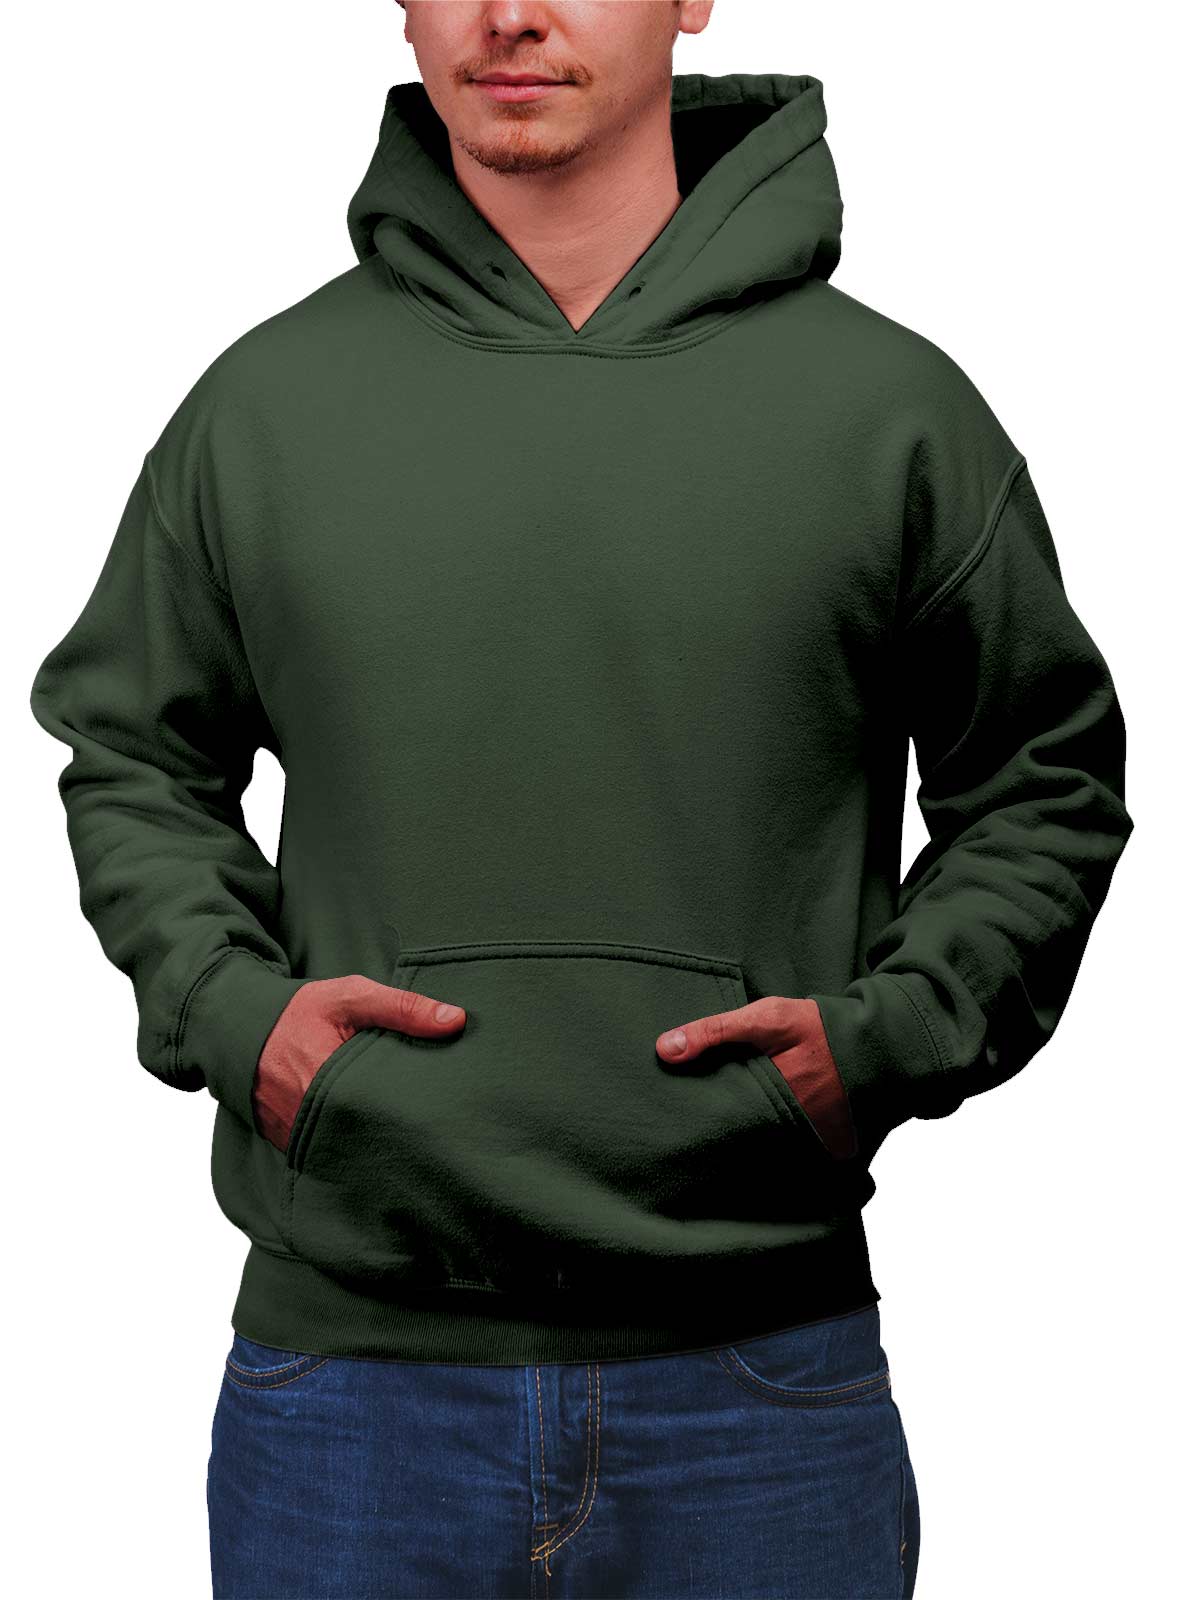 Military Green Plain Cotton Hoodie for Men & WomenMilitary Green Plain Cotton Hoodie for Men & Women